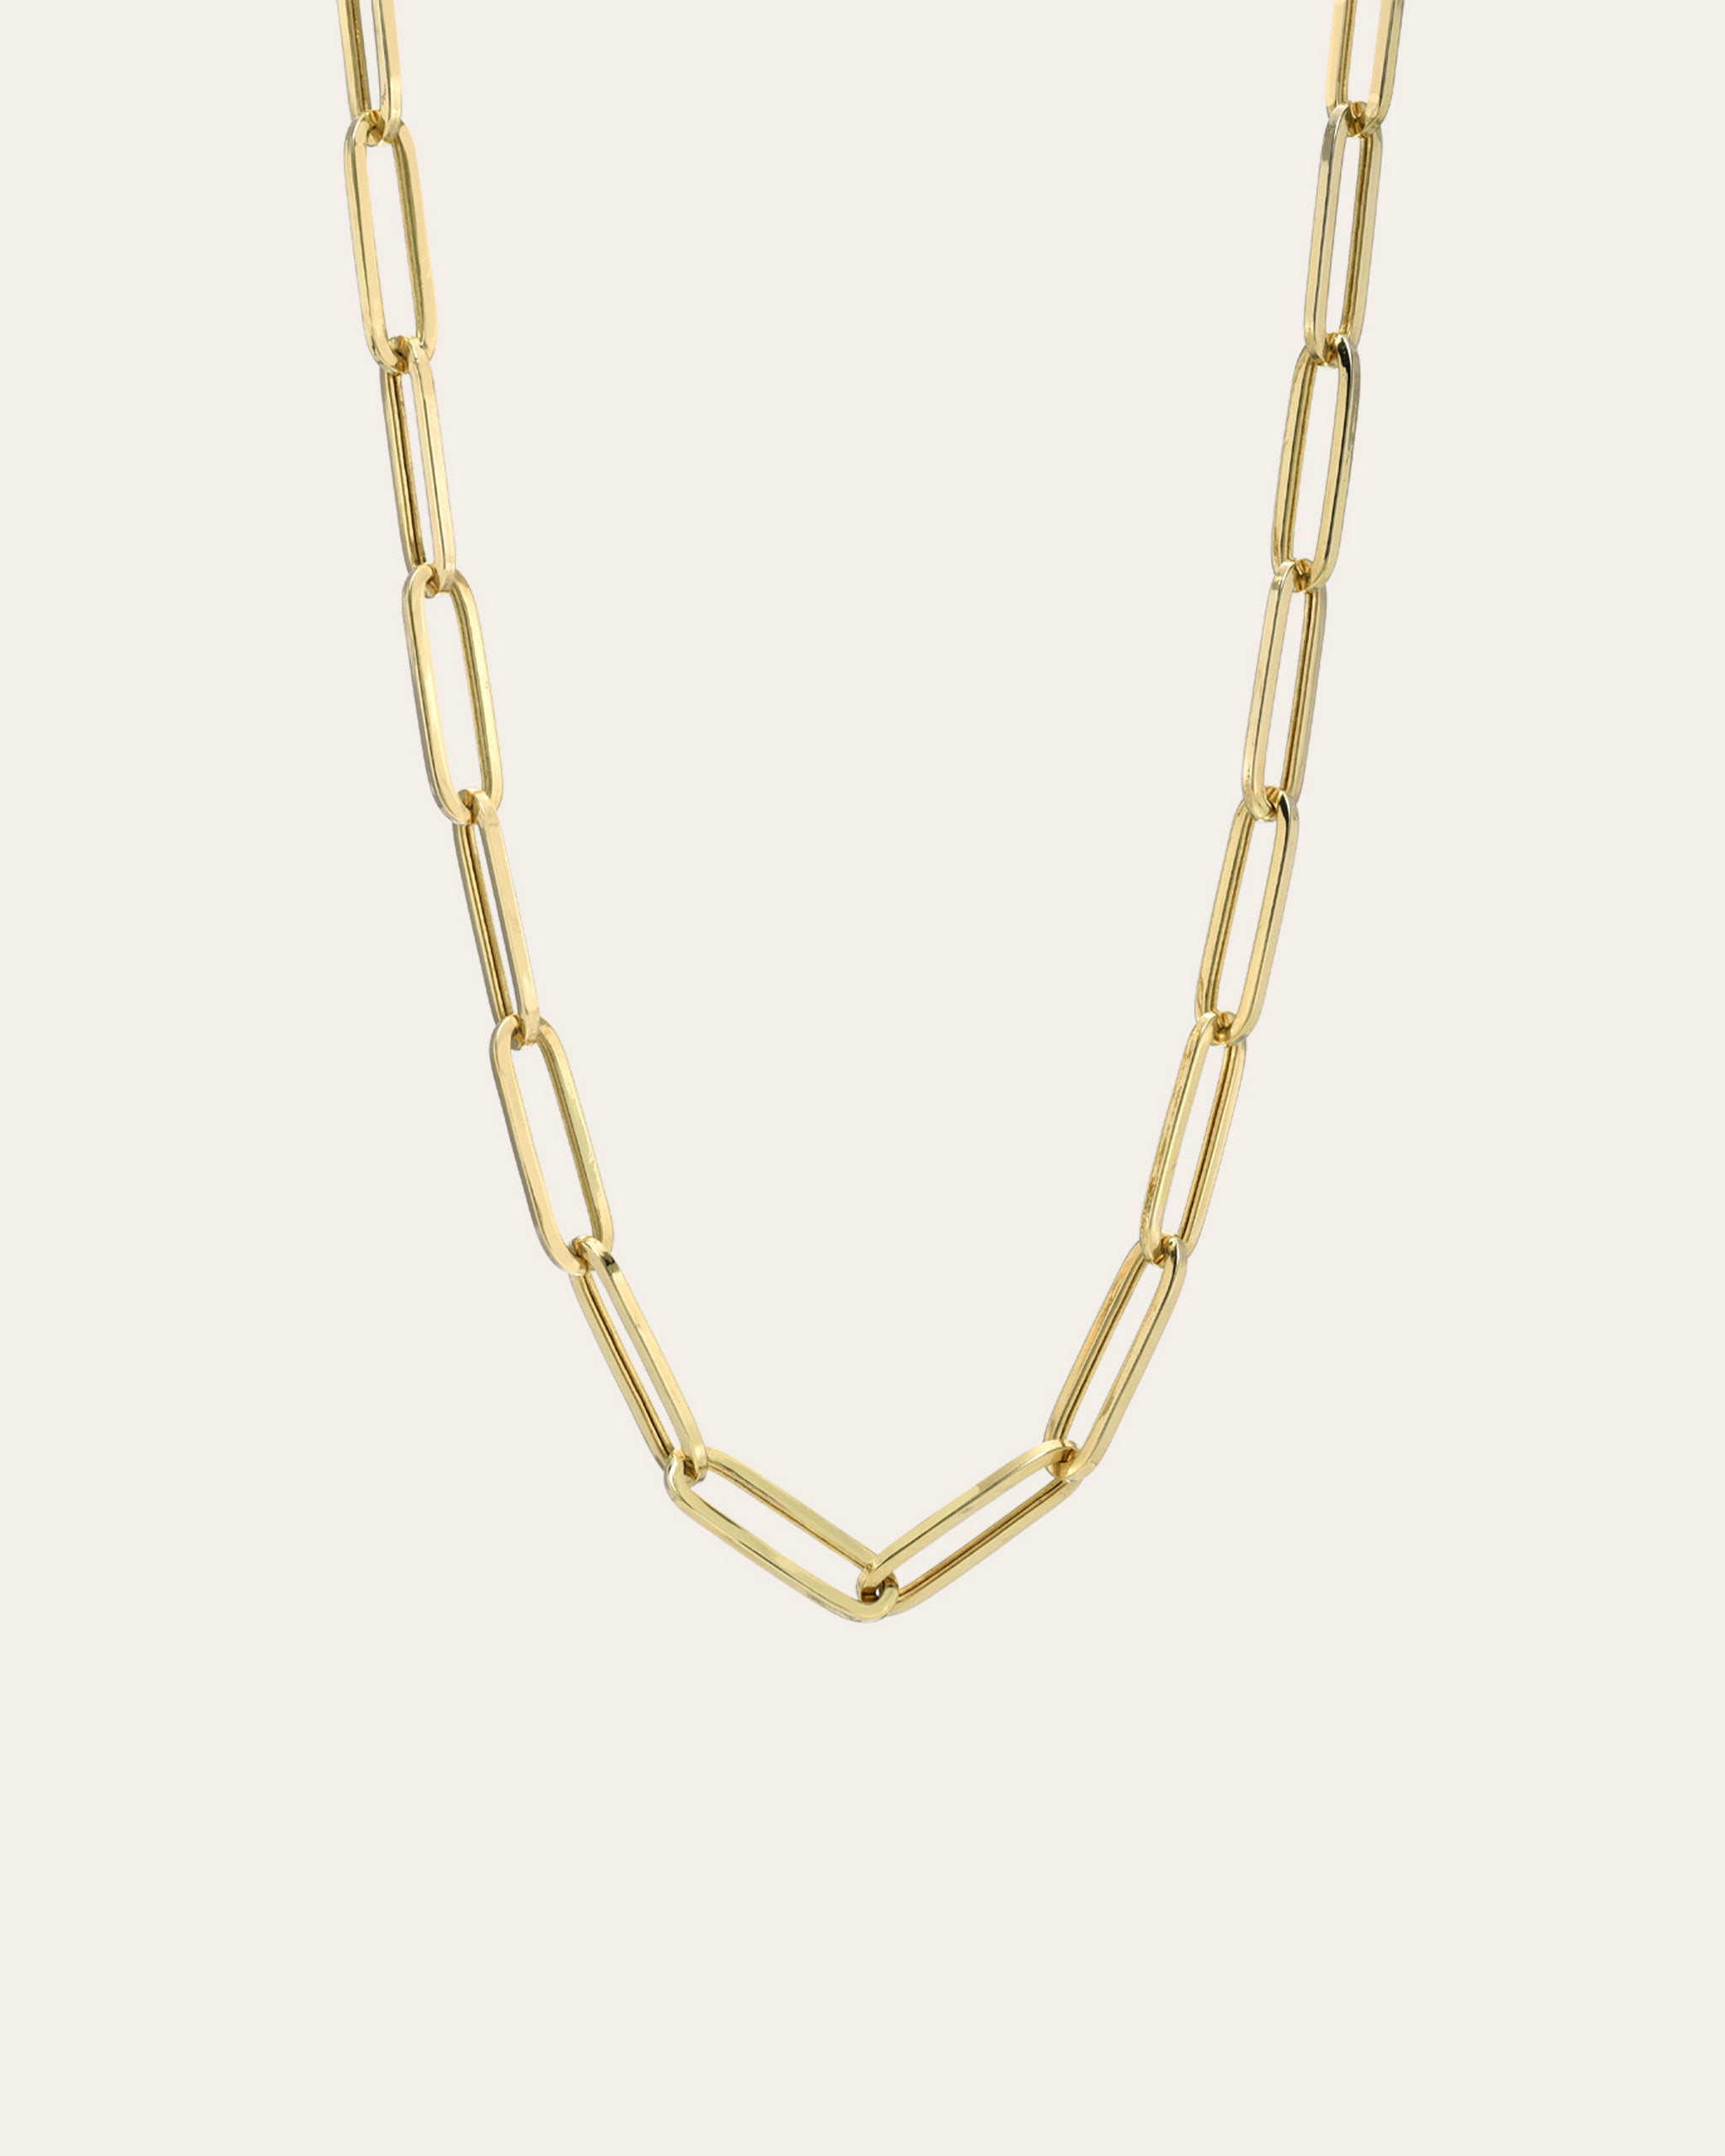 Tiffany & Co. 18 Karat Yellow Gold Paper Clip Chain Link Necklace